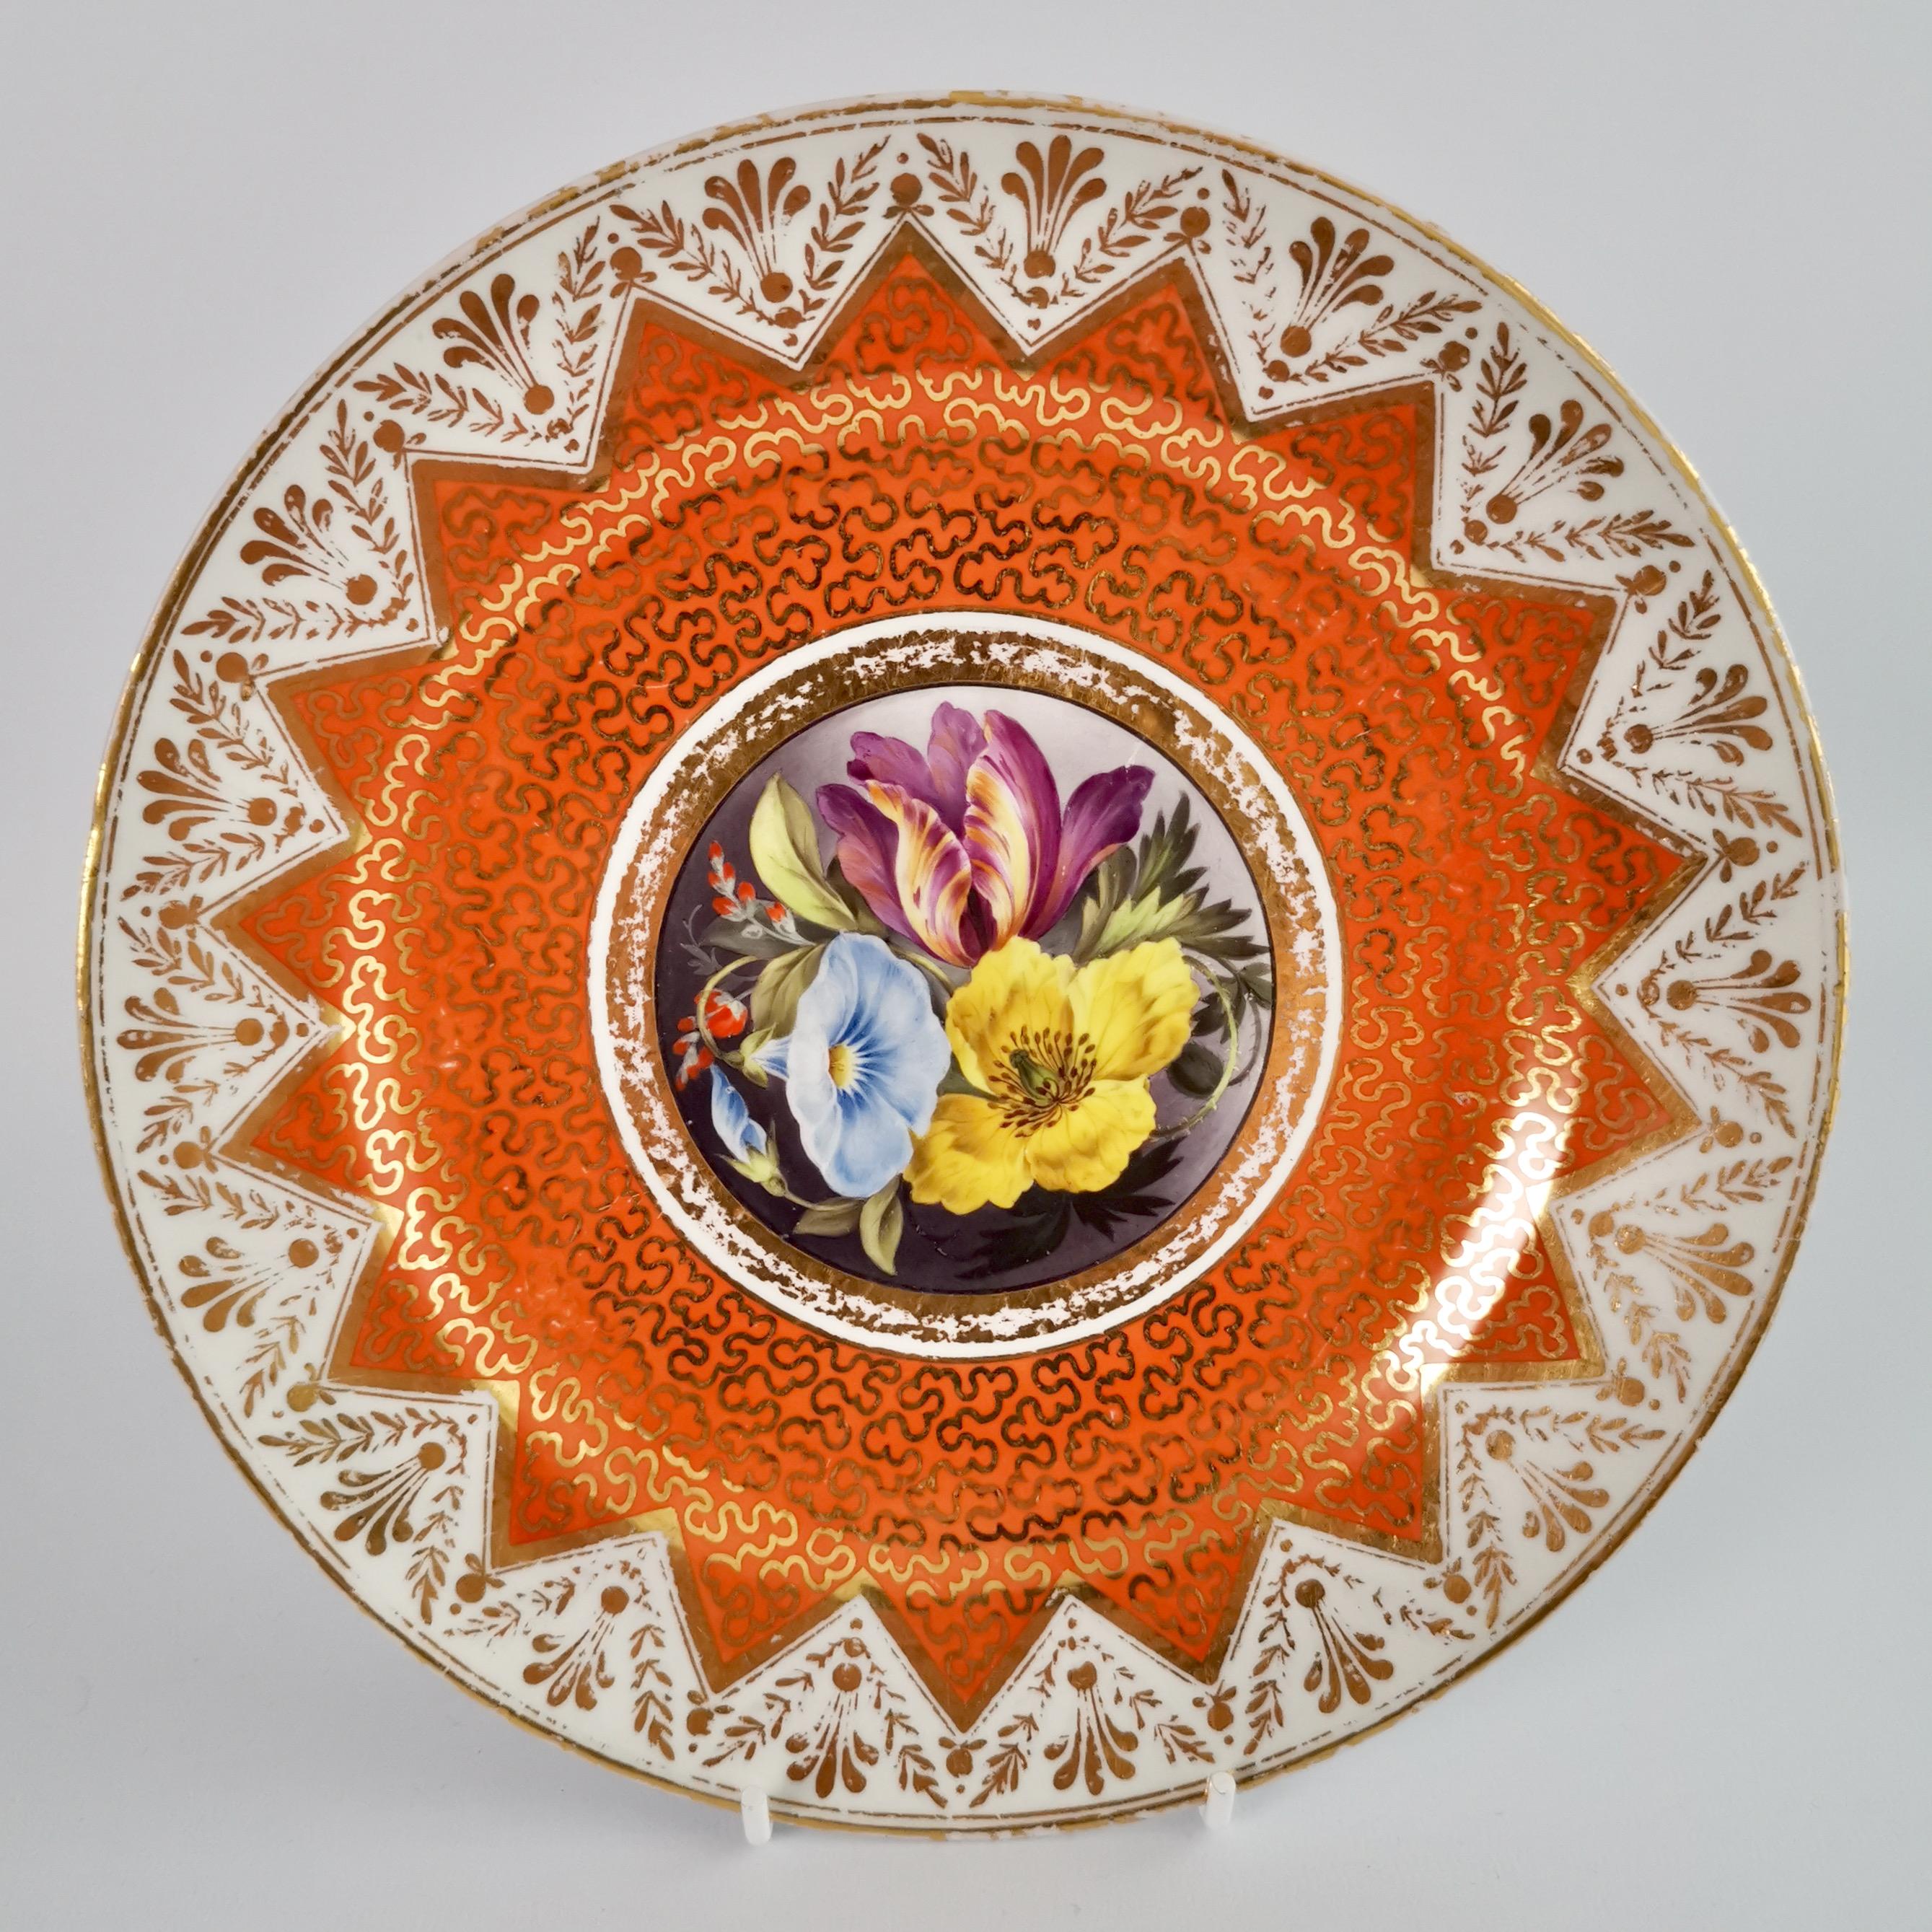 Chamberlains Worcester Set of Plates, Orange, Paintings by H. Chamberlain, 1815 2